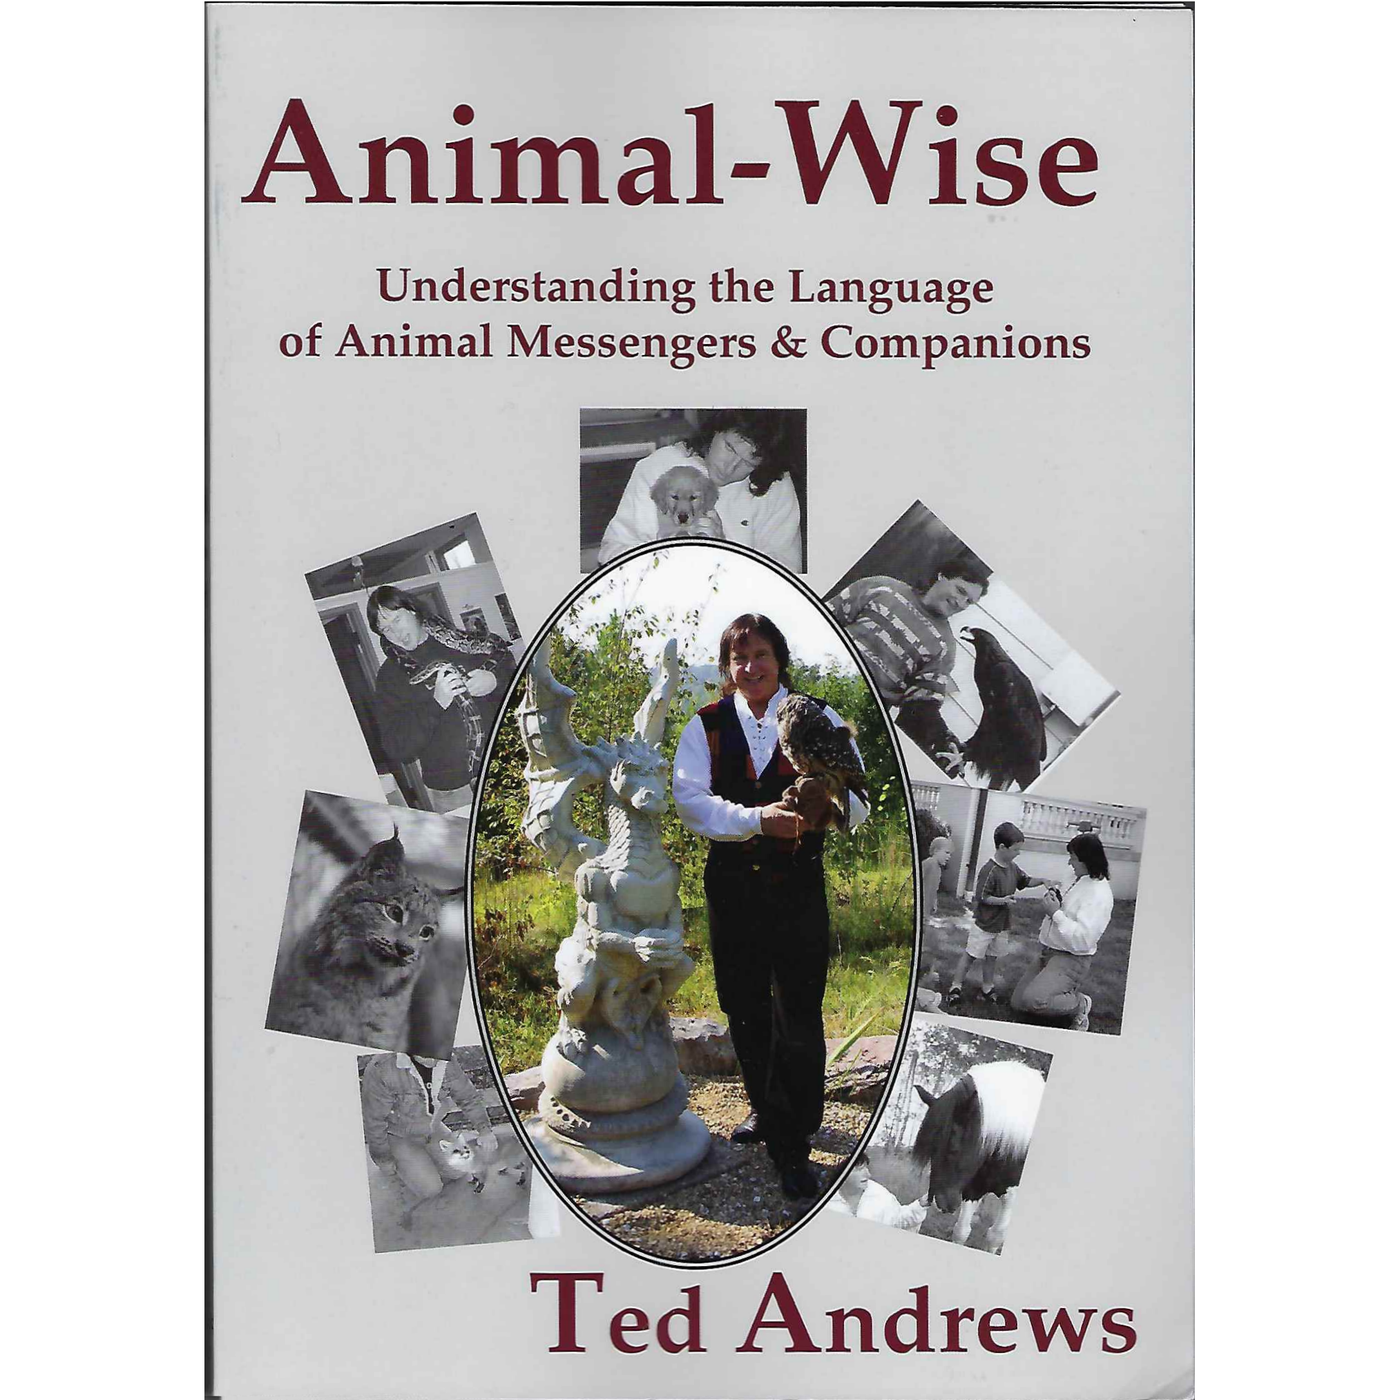 Animal-Wise by Ted Andrews